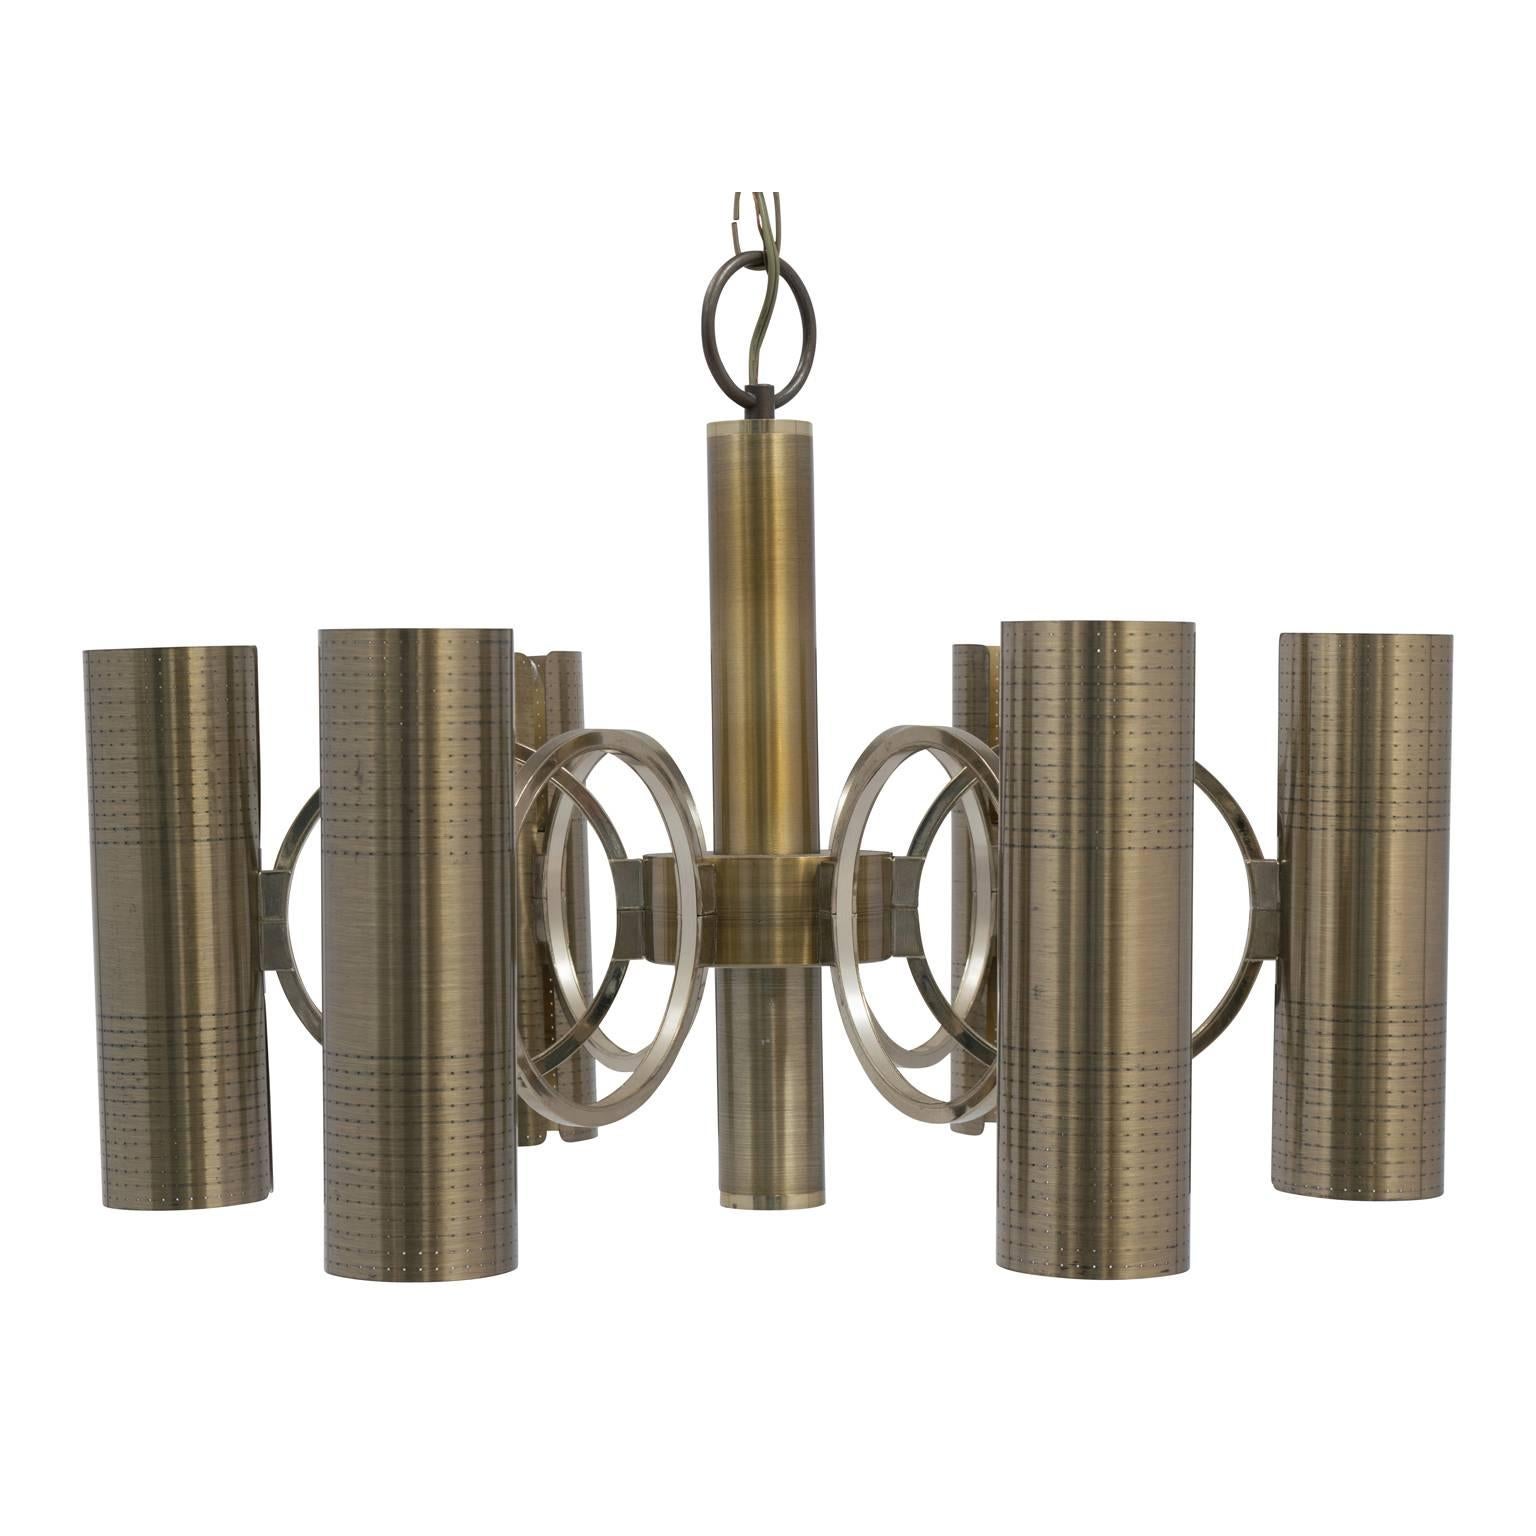 Late 20th Century Mid-Century Six-Arm Twelve-Light Brass and Chrome Chandelier by Sciolari For Sale